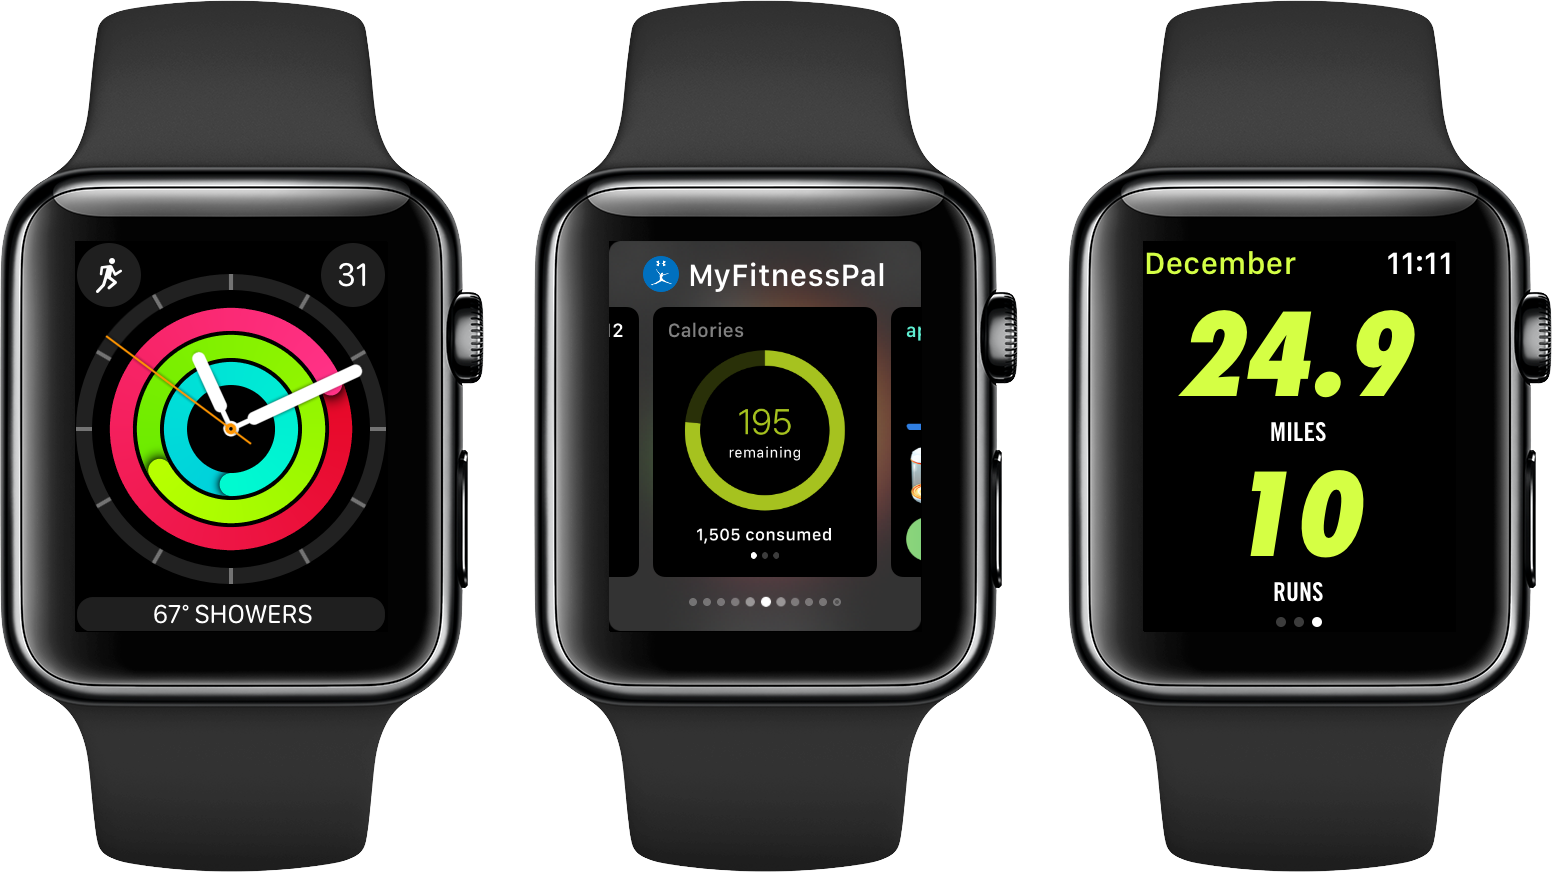 Apple Watch, New Year's resolutions, and losing 50 pounds - 9to5Mac